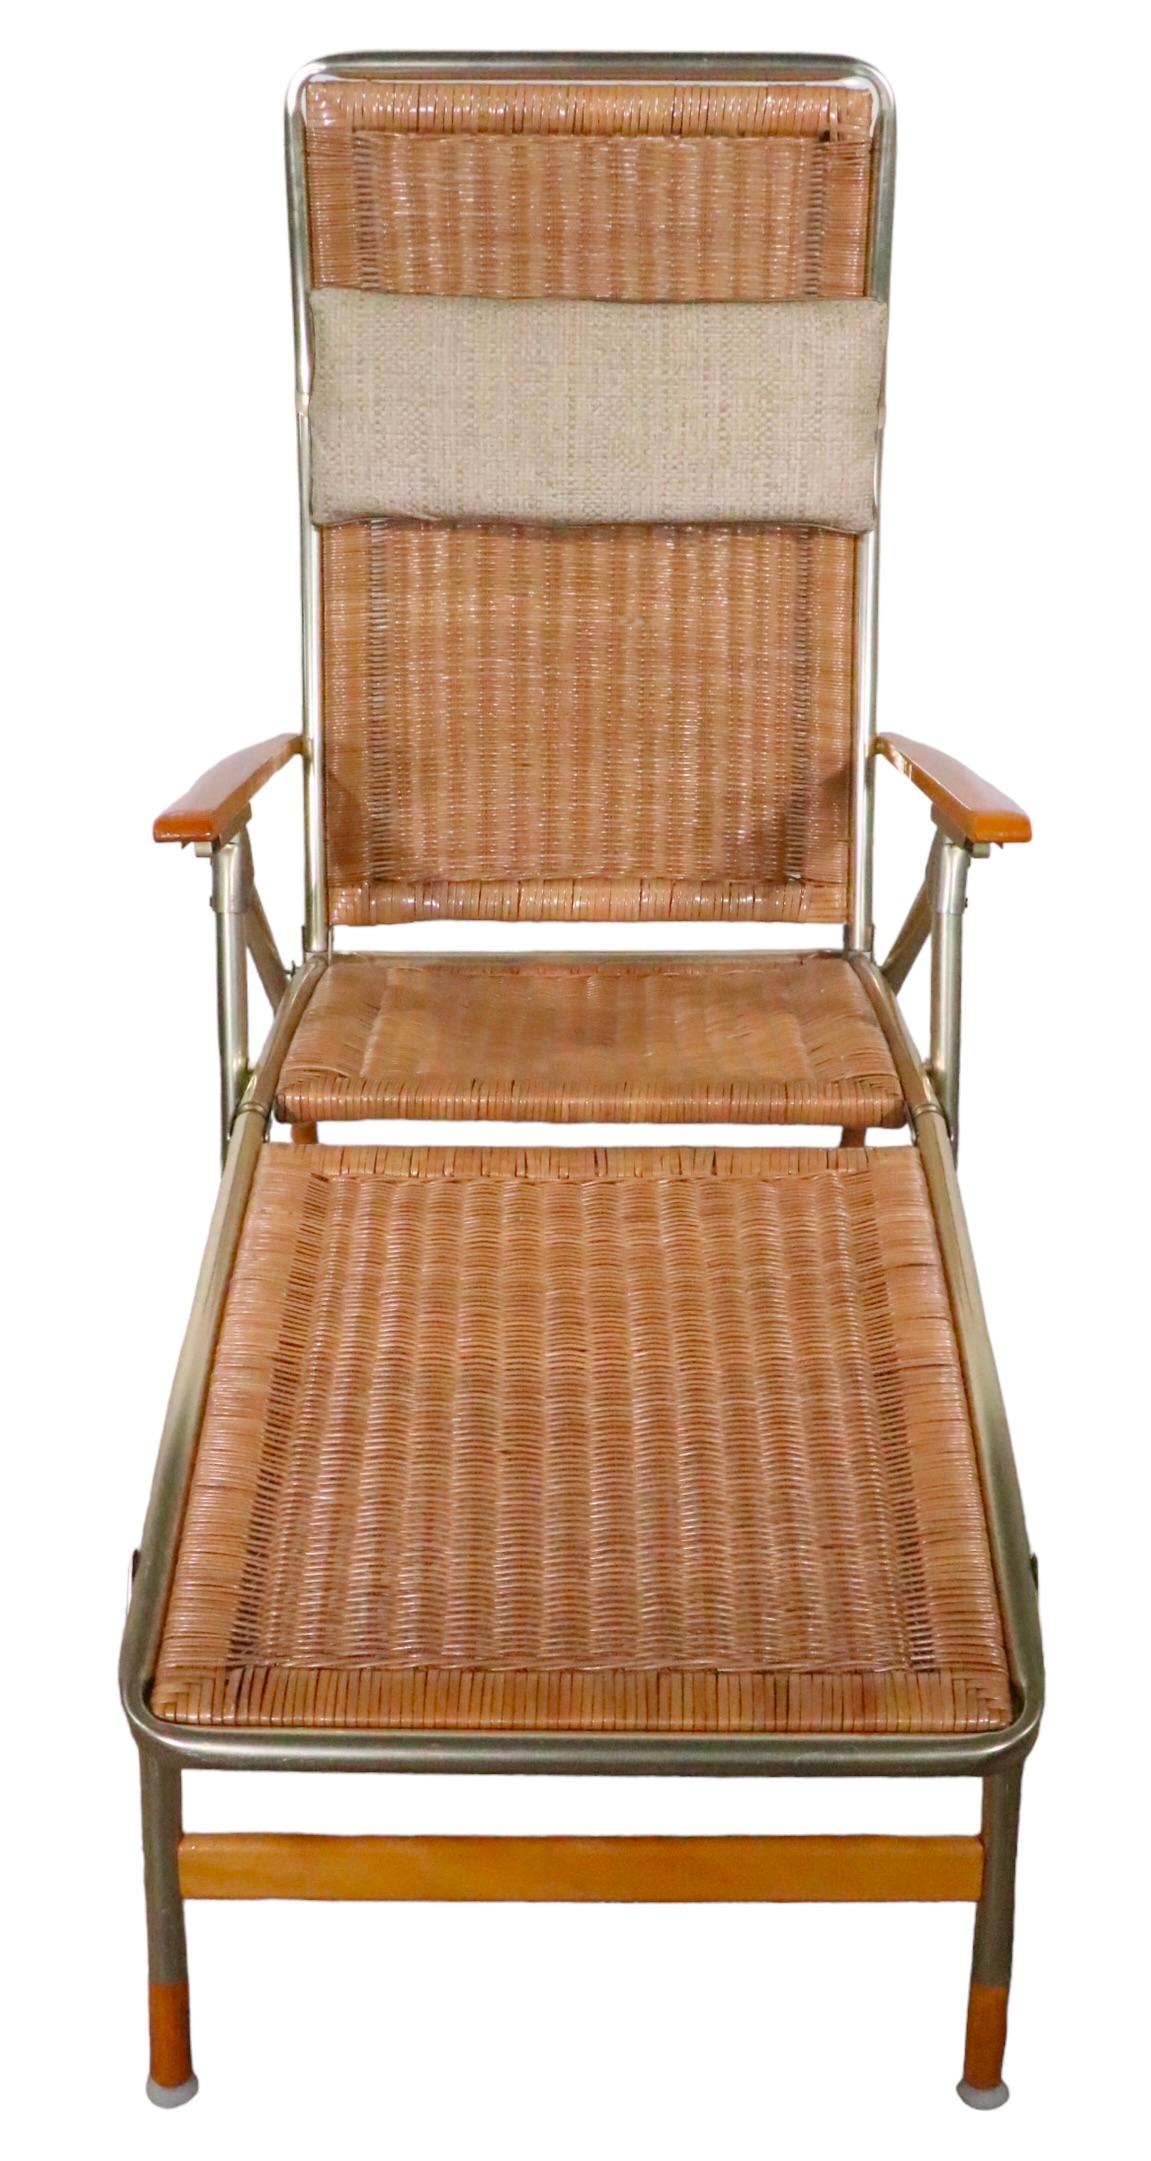 20th Century Mid Century Patio Poolside Folding Chaise Lounge by Telescope Chair Company  For Sale